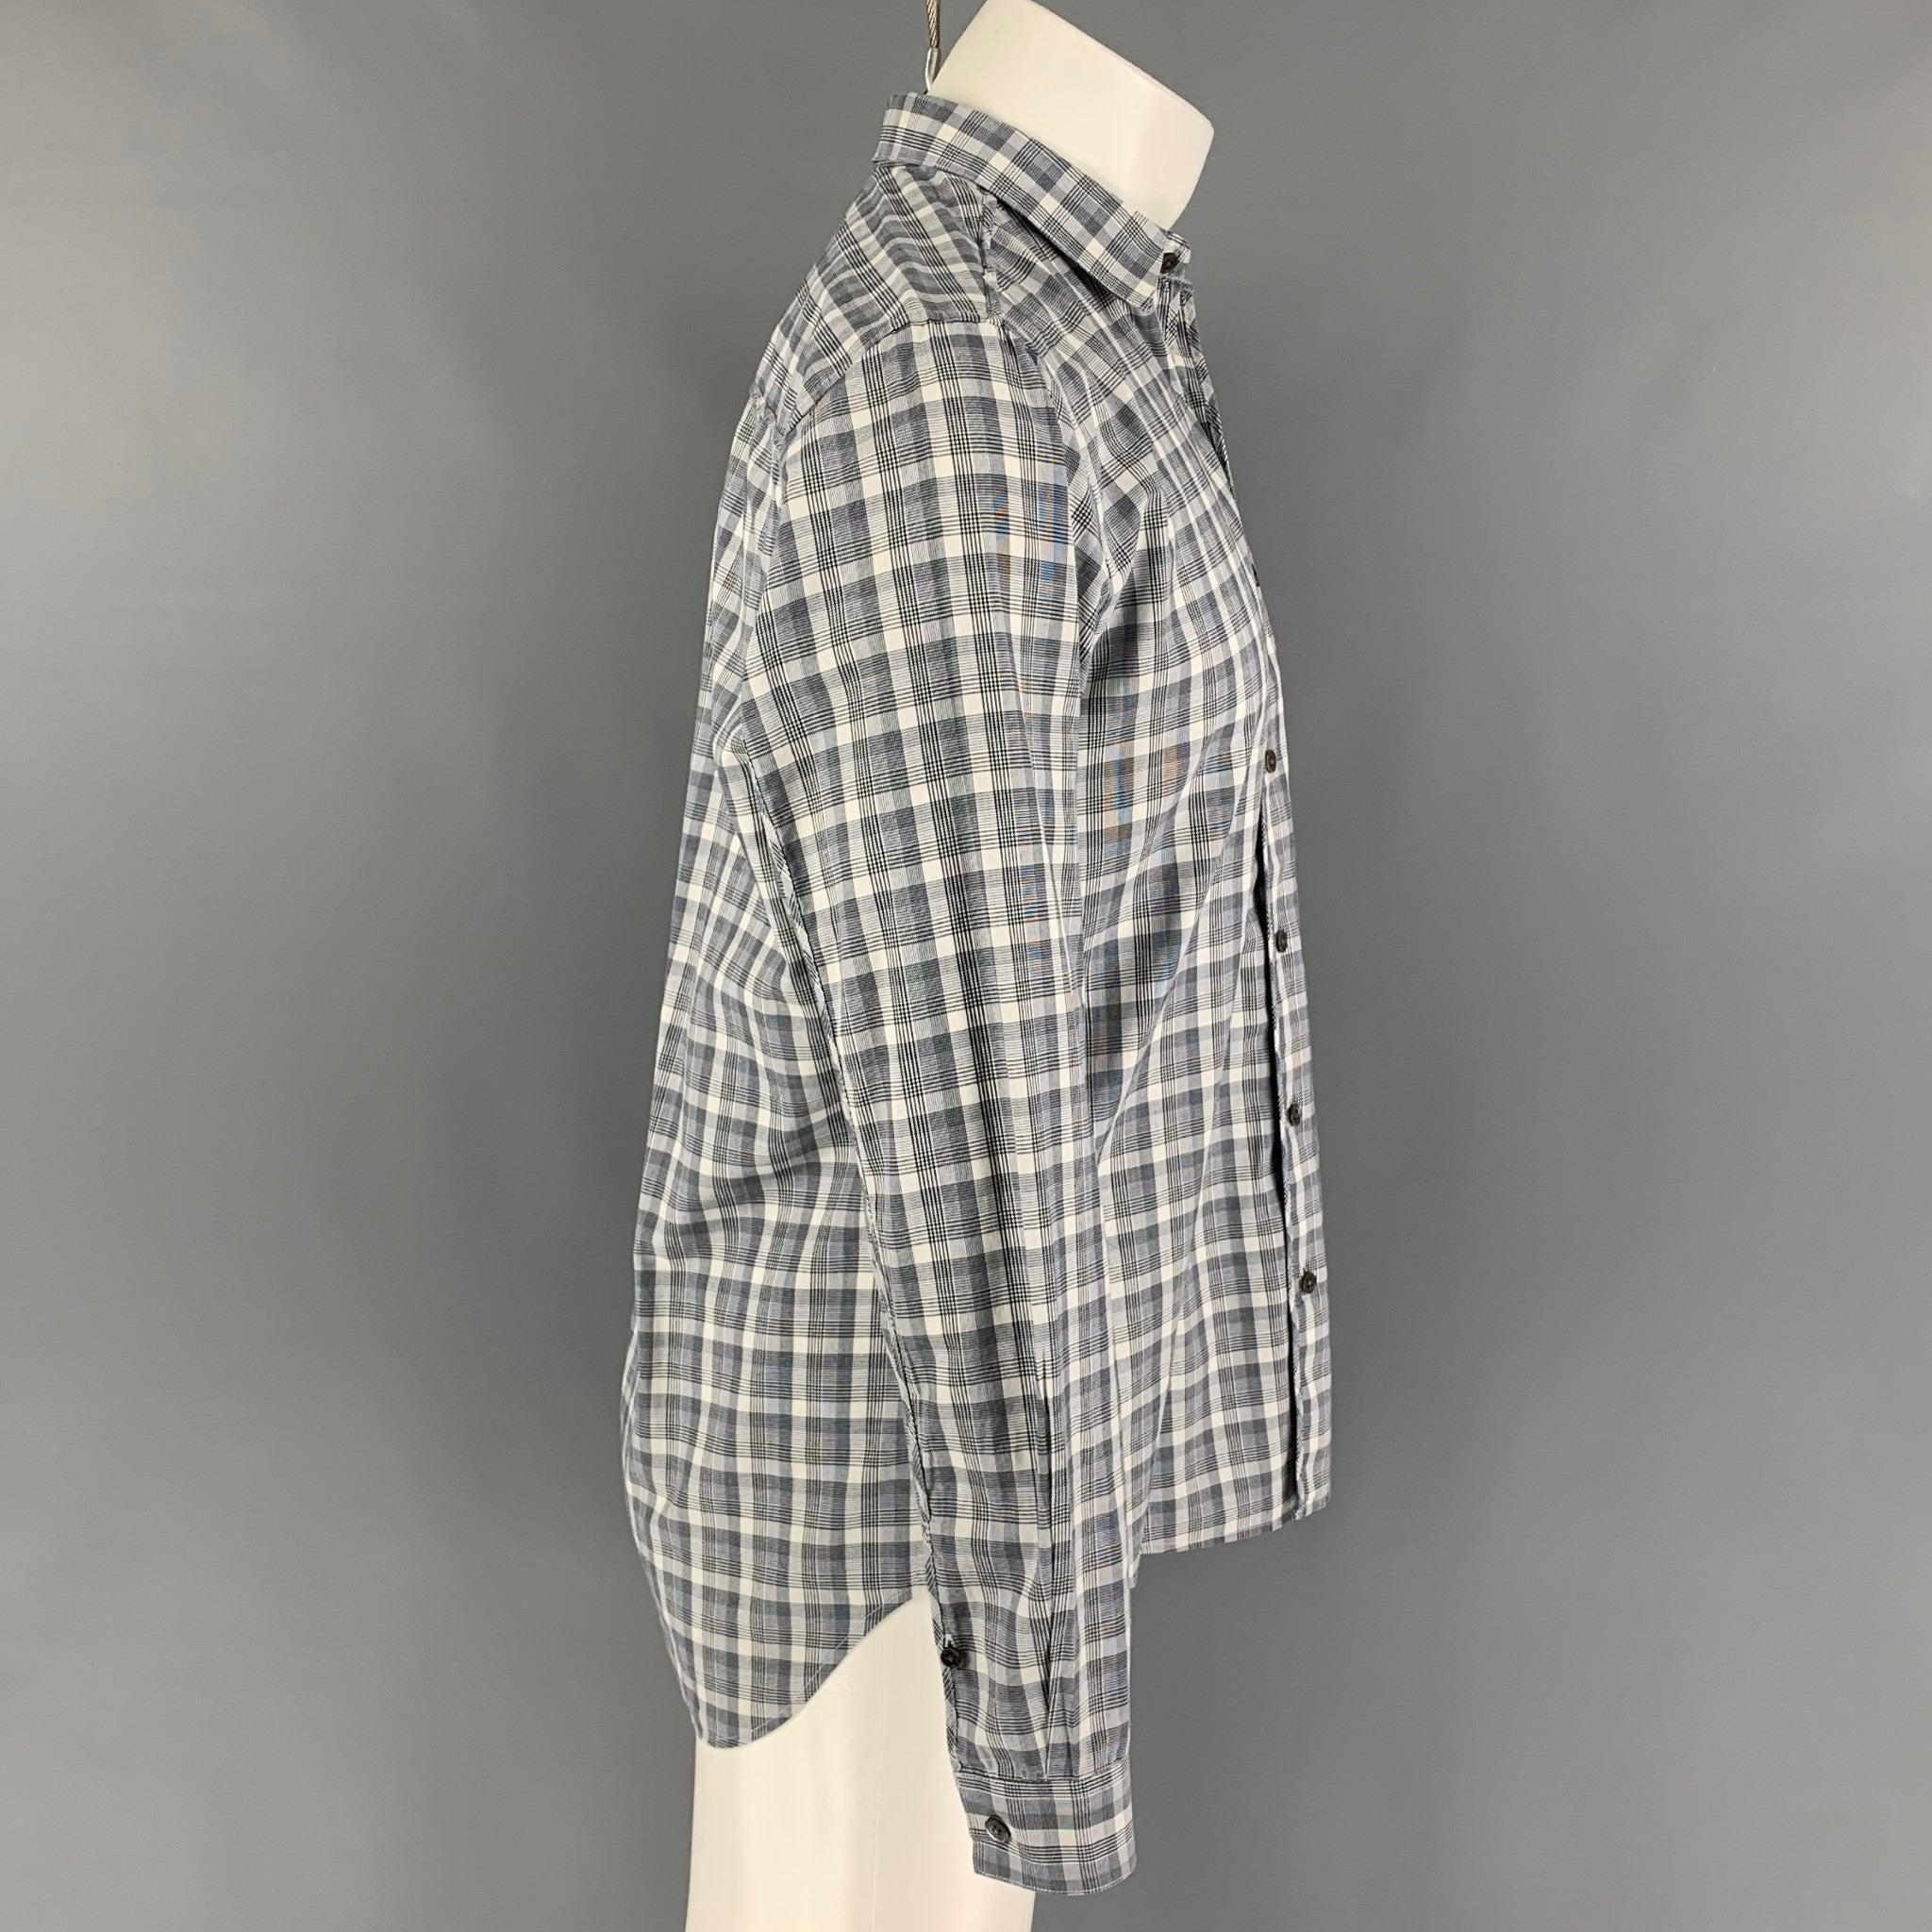 THEORY long sleeve shirt comes in a grey & white plaid cotton featuring a spread collar and a button up closure.
Excellent
Pre-Owned Condition. 

Marked:   M  

Measurements: 
 
Shoulder: 17.5 inches Chest: 44 inches Sleeve: 25 inches Length: 29.5